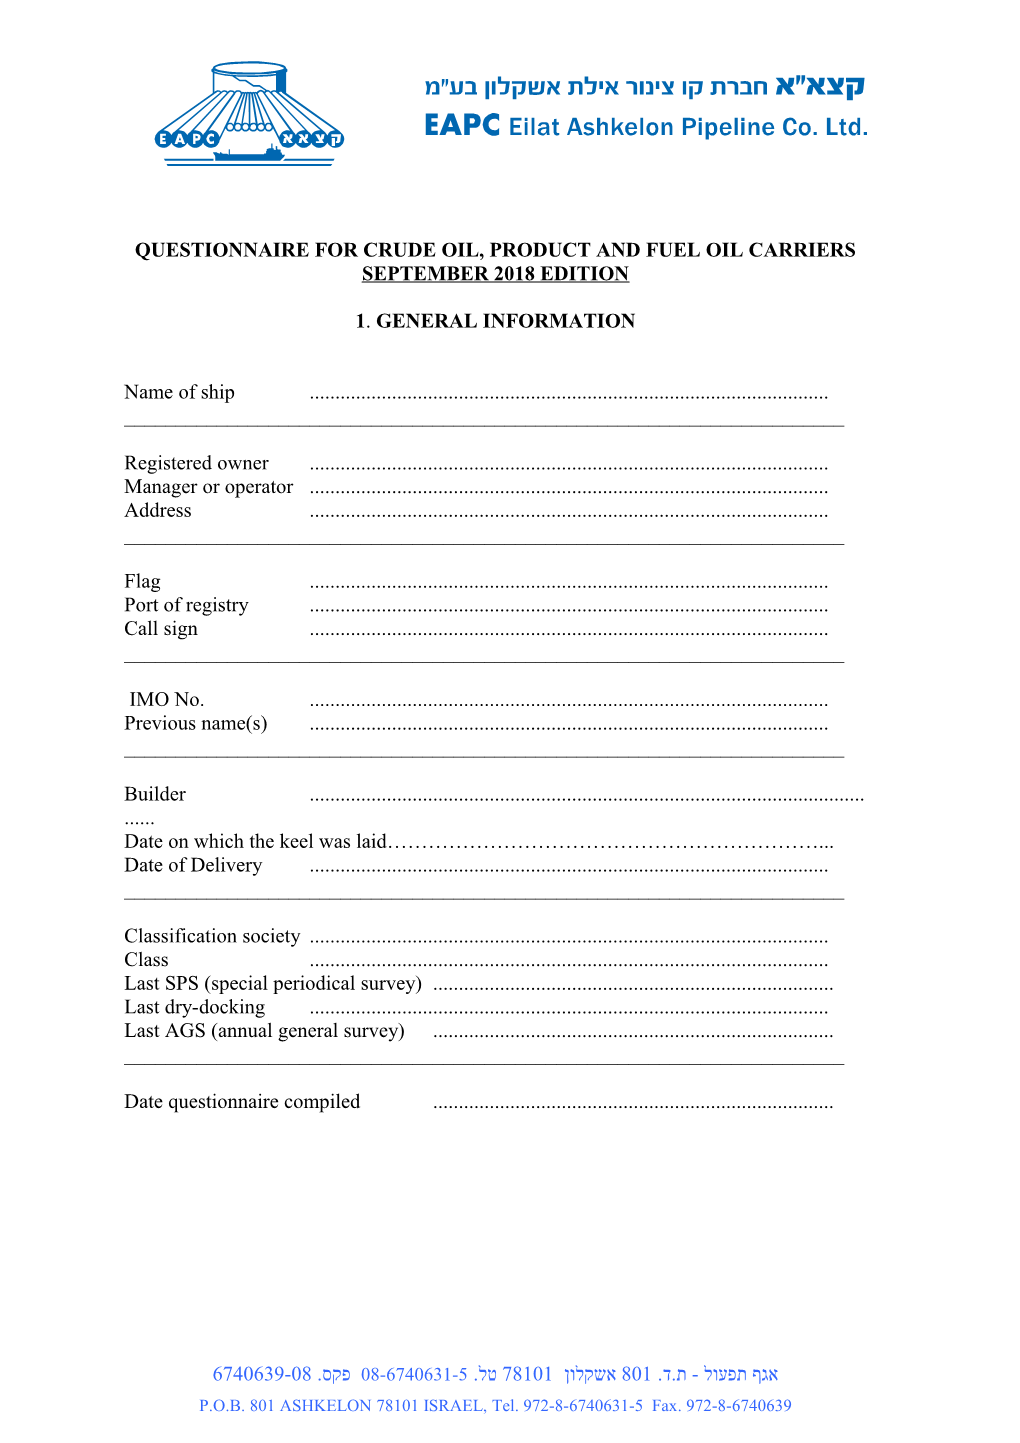 Questionnaire for Crude Oil, Product and Fuel Oilcarriers